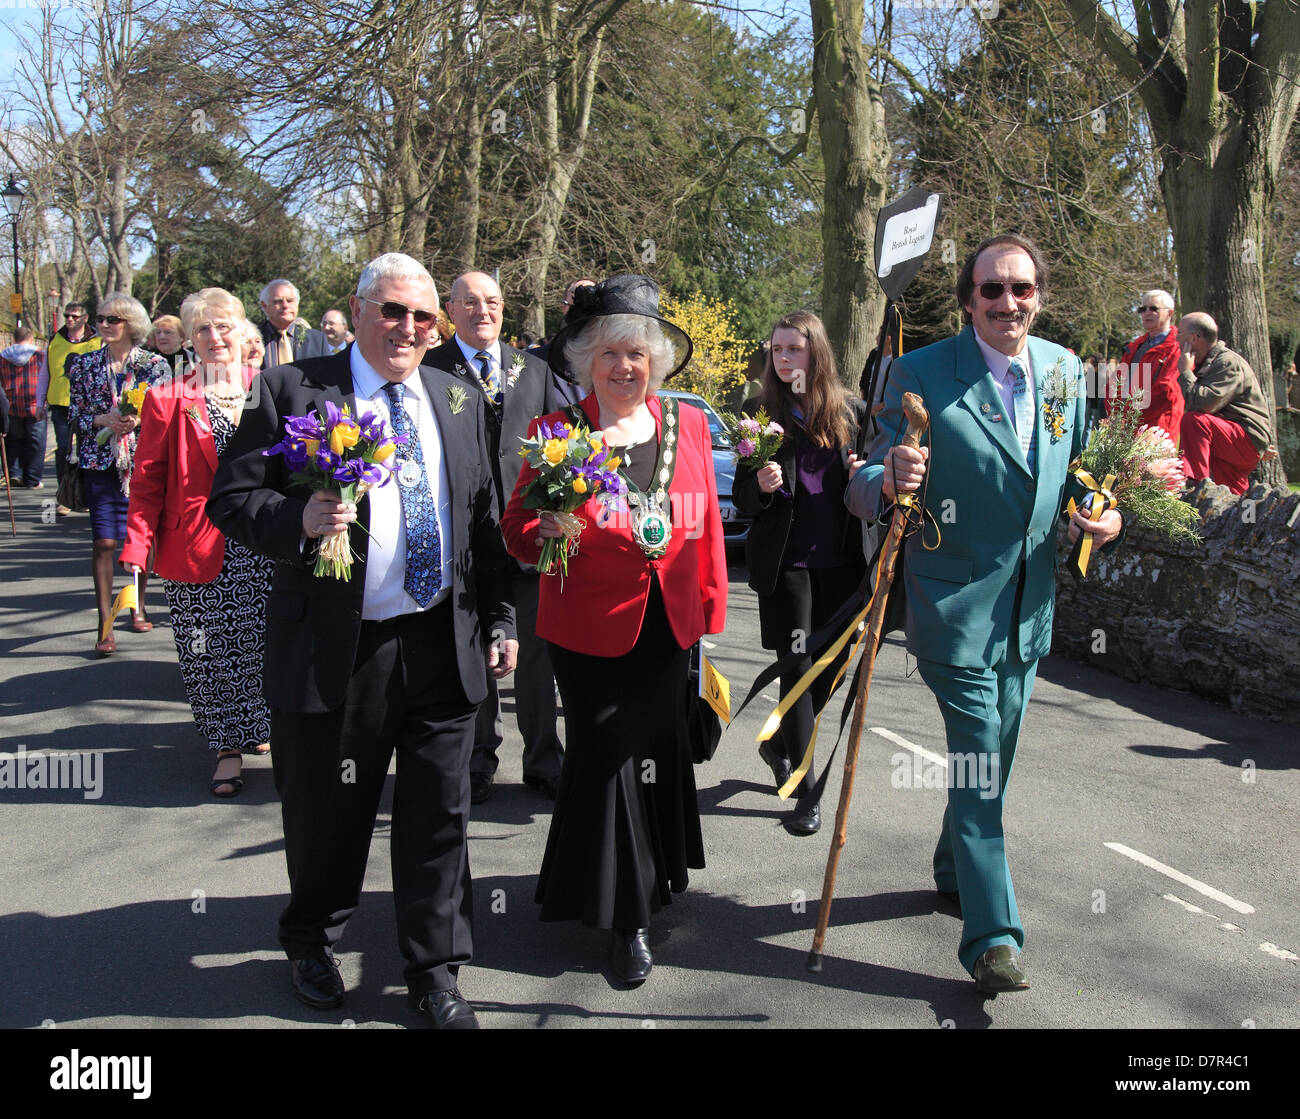 Citizens walk to the church celebrating William Shakespeare, at the annual Birthday Memorial Parade at Stratford upon Avon. Stock Photo